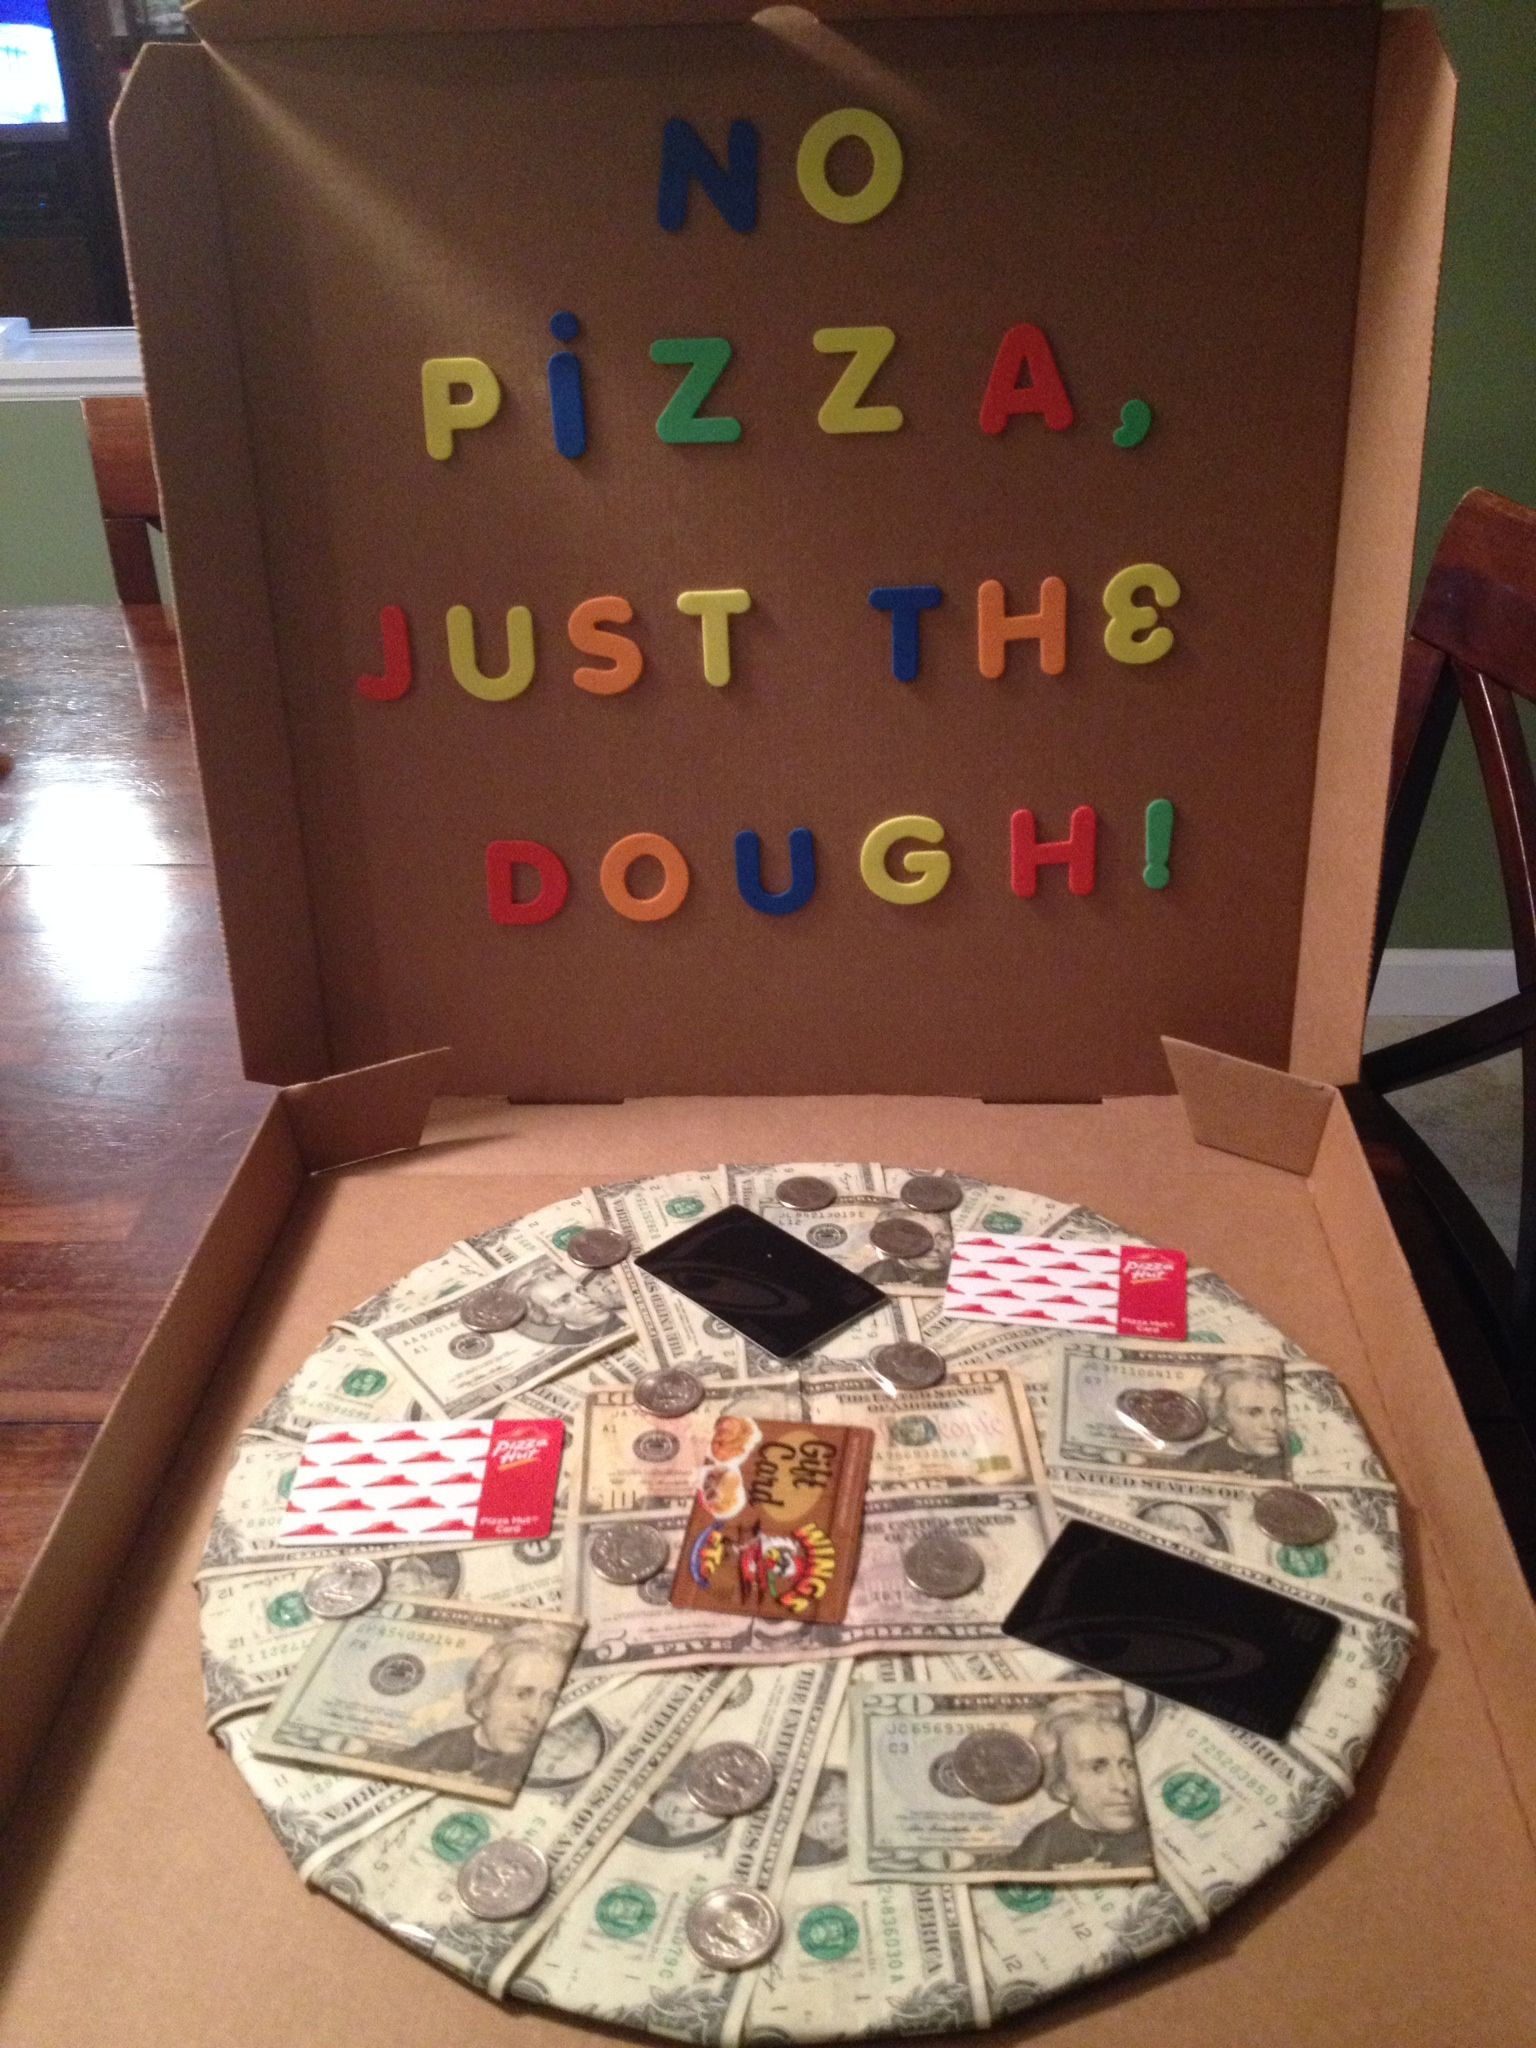 19Th Birthday Gift Ideas For Guys
 No pizza just the dough Made this for my son s 19th